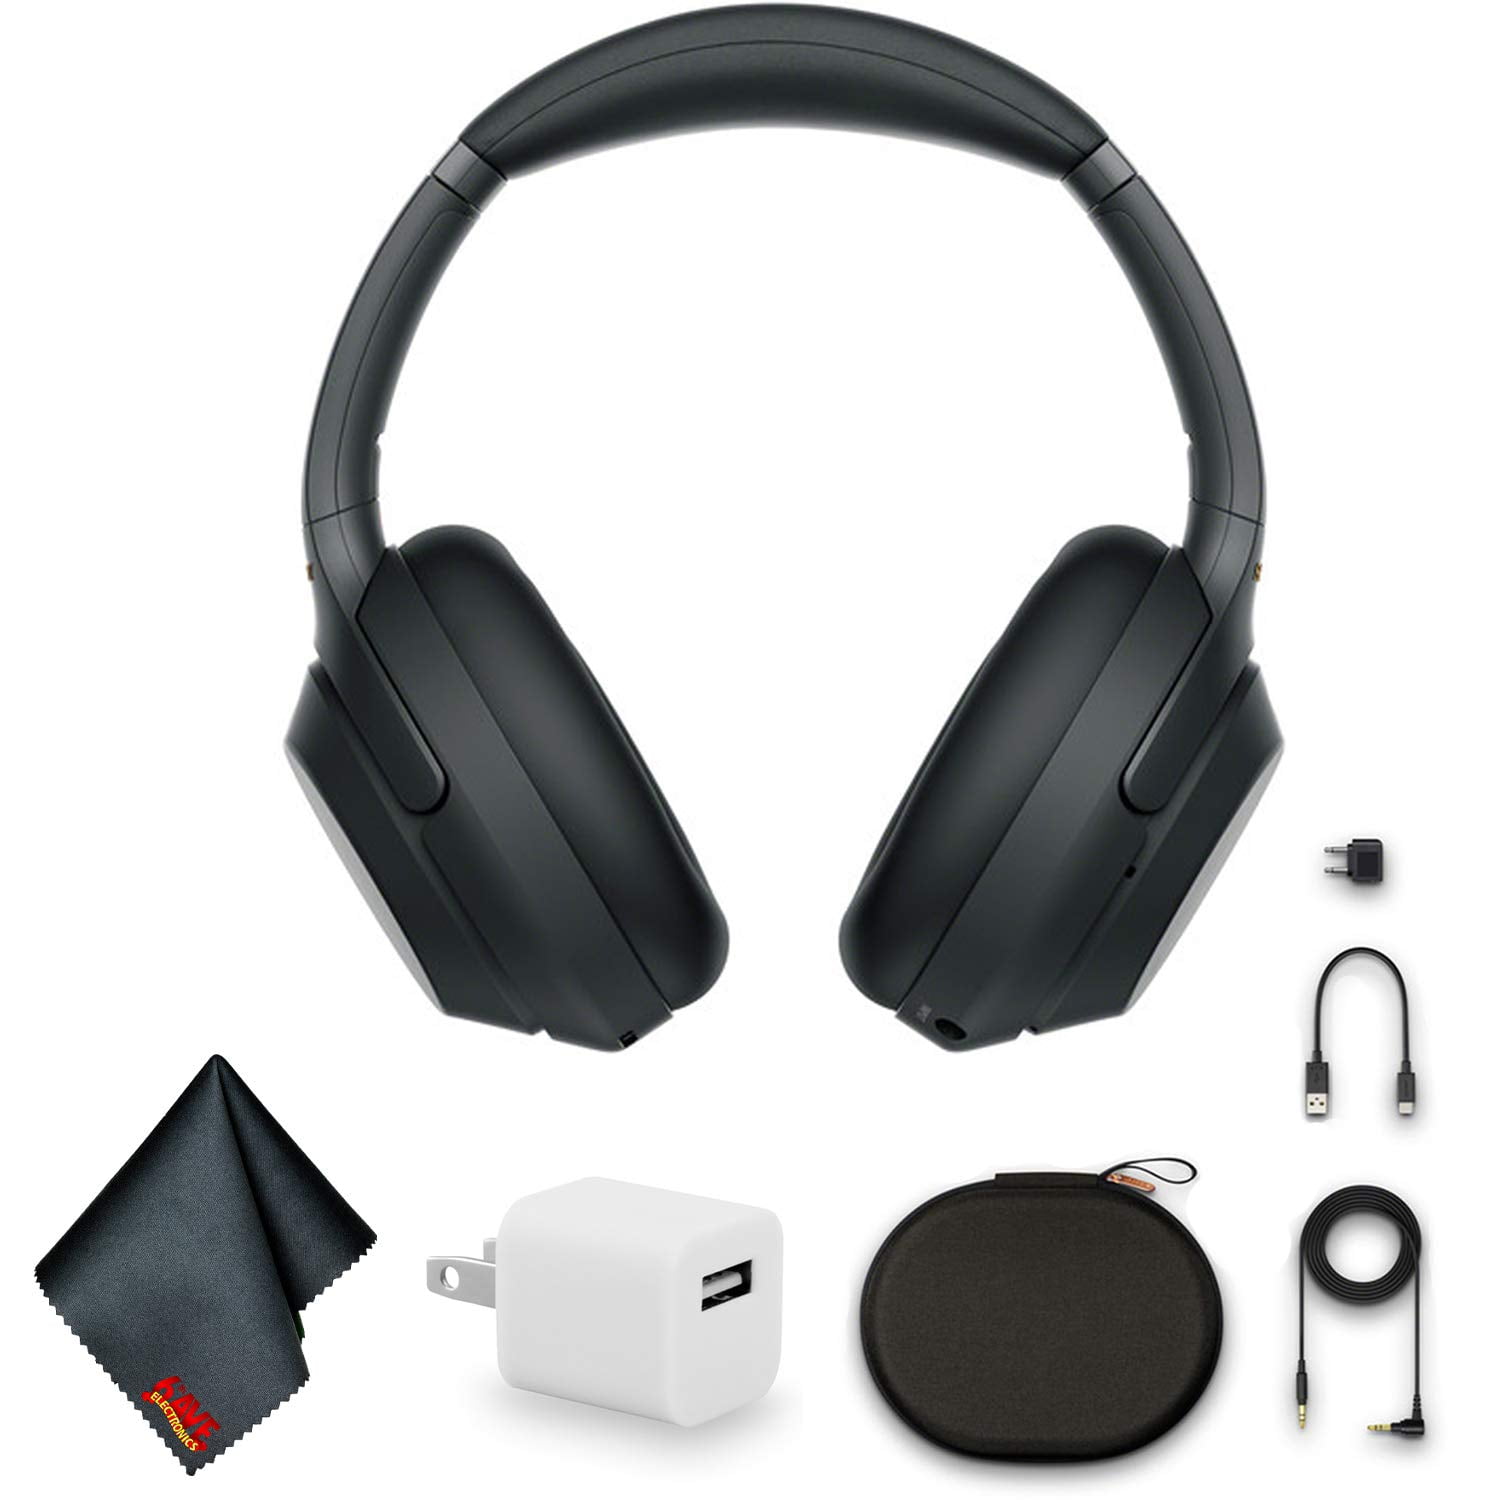 Sony WH-1000XM3 Wireless Noise-Canceling Over-Ear Headphones 